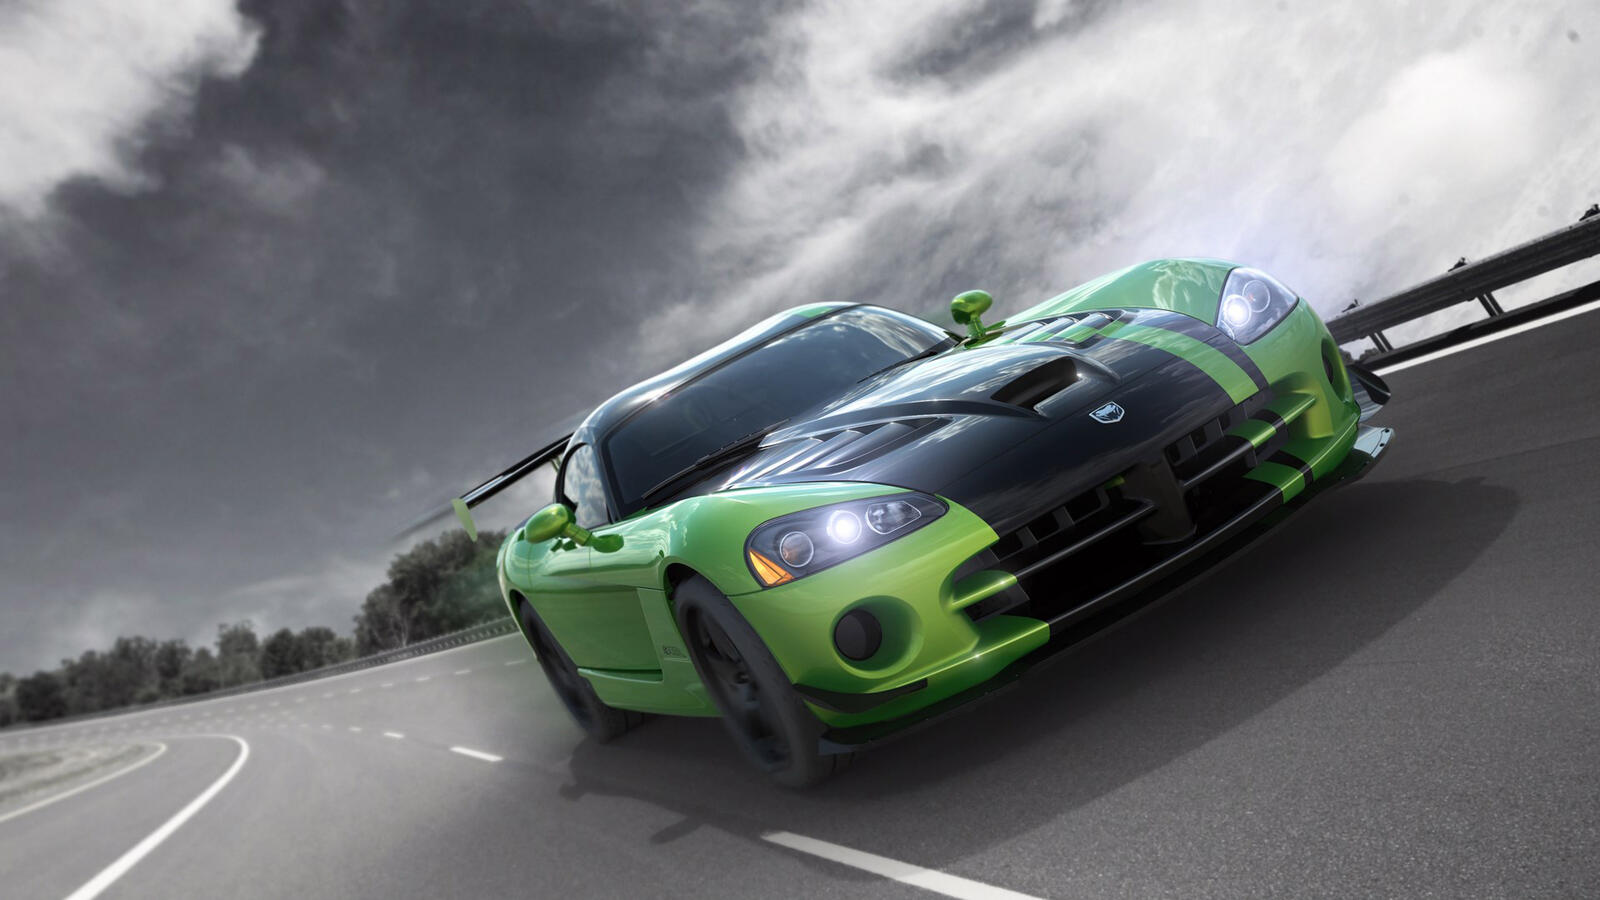 Free photo Green Dodge Viper driving on the road